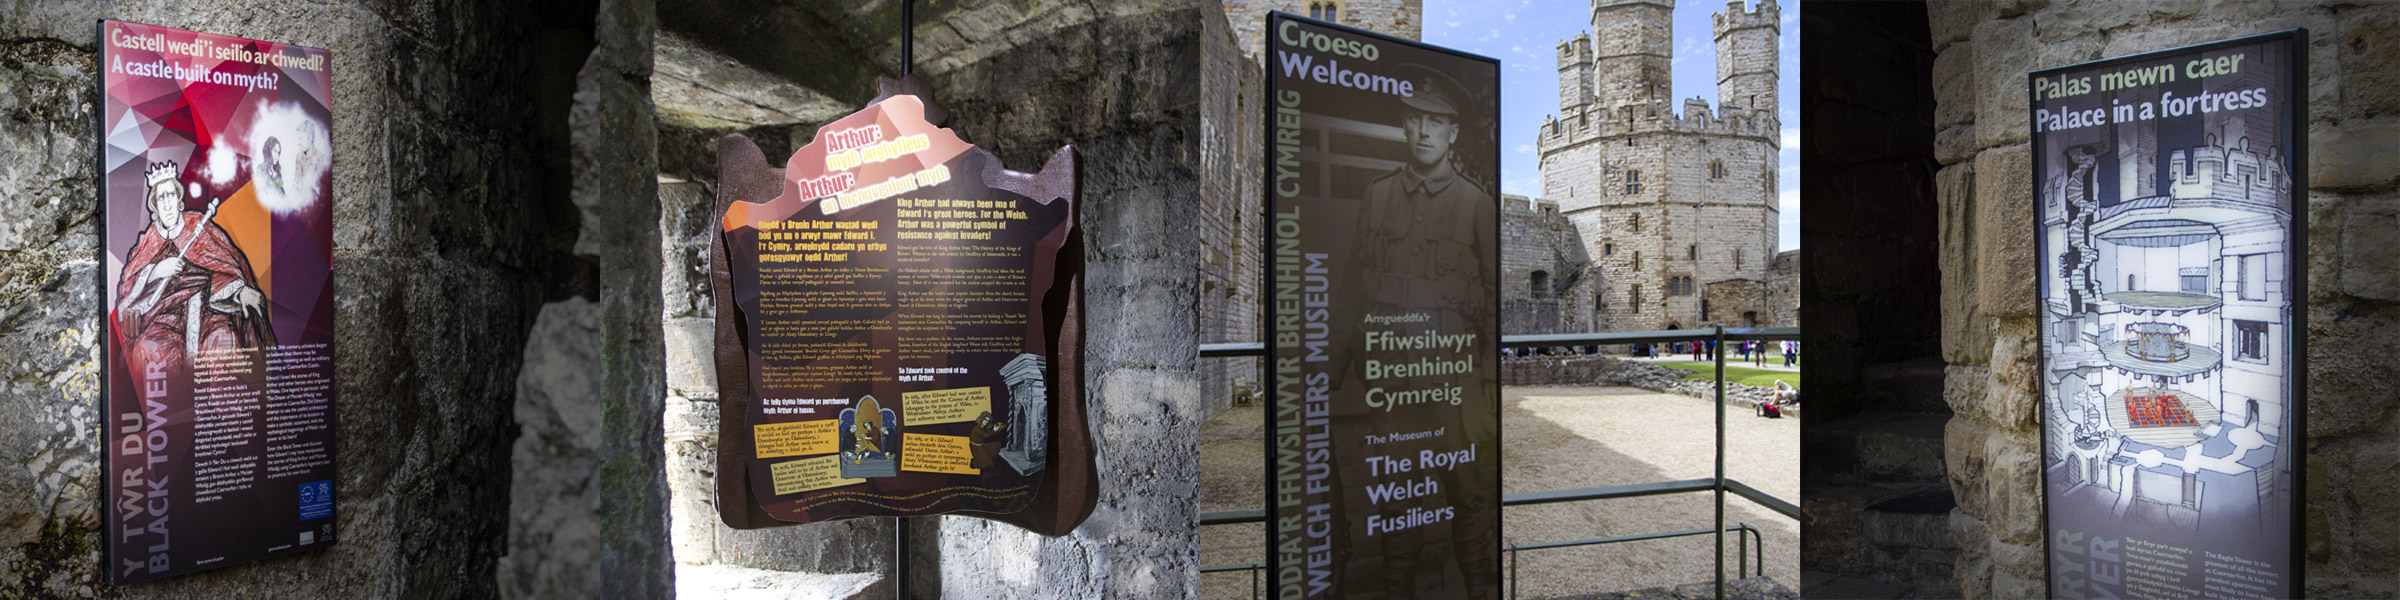 Montage of interpretation installations at Caernarfon Castle, Wales, for cadw Welsh Government